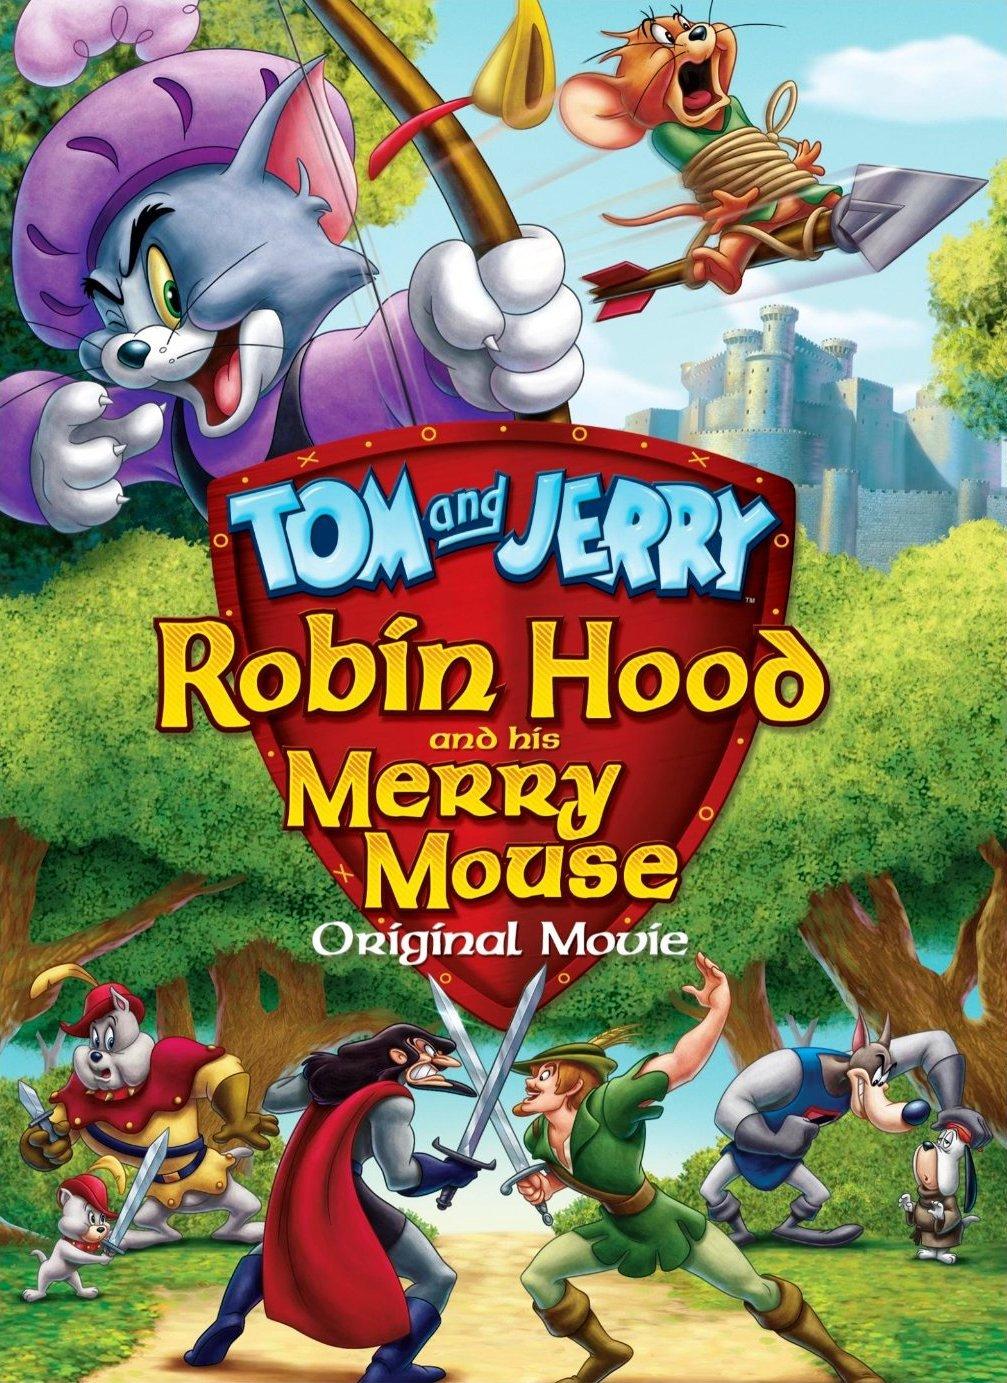 Nonton film Tom and Jerry Robin Hood and His Merry Mouse layarkaca21 indoxx1 ganool online streaming terbaru